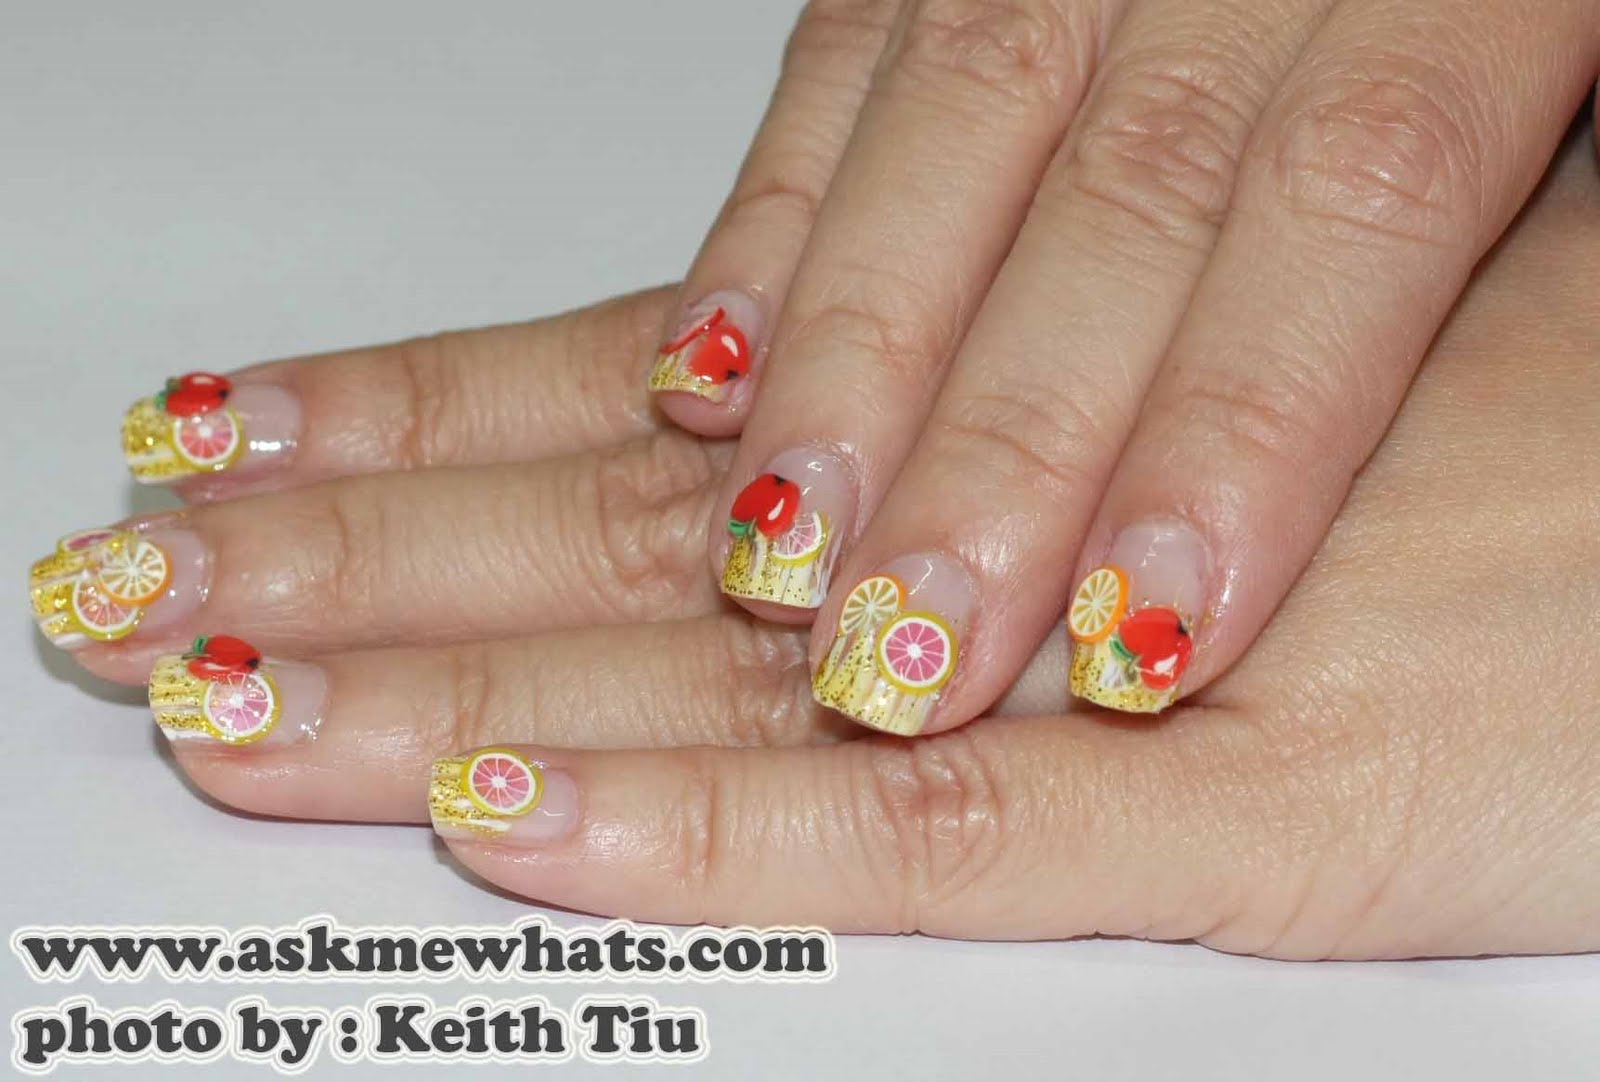 3. Fimo Fruit Nail Art Designs for Beginners - wide 8